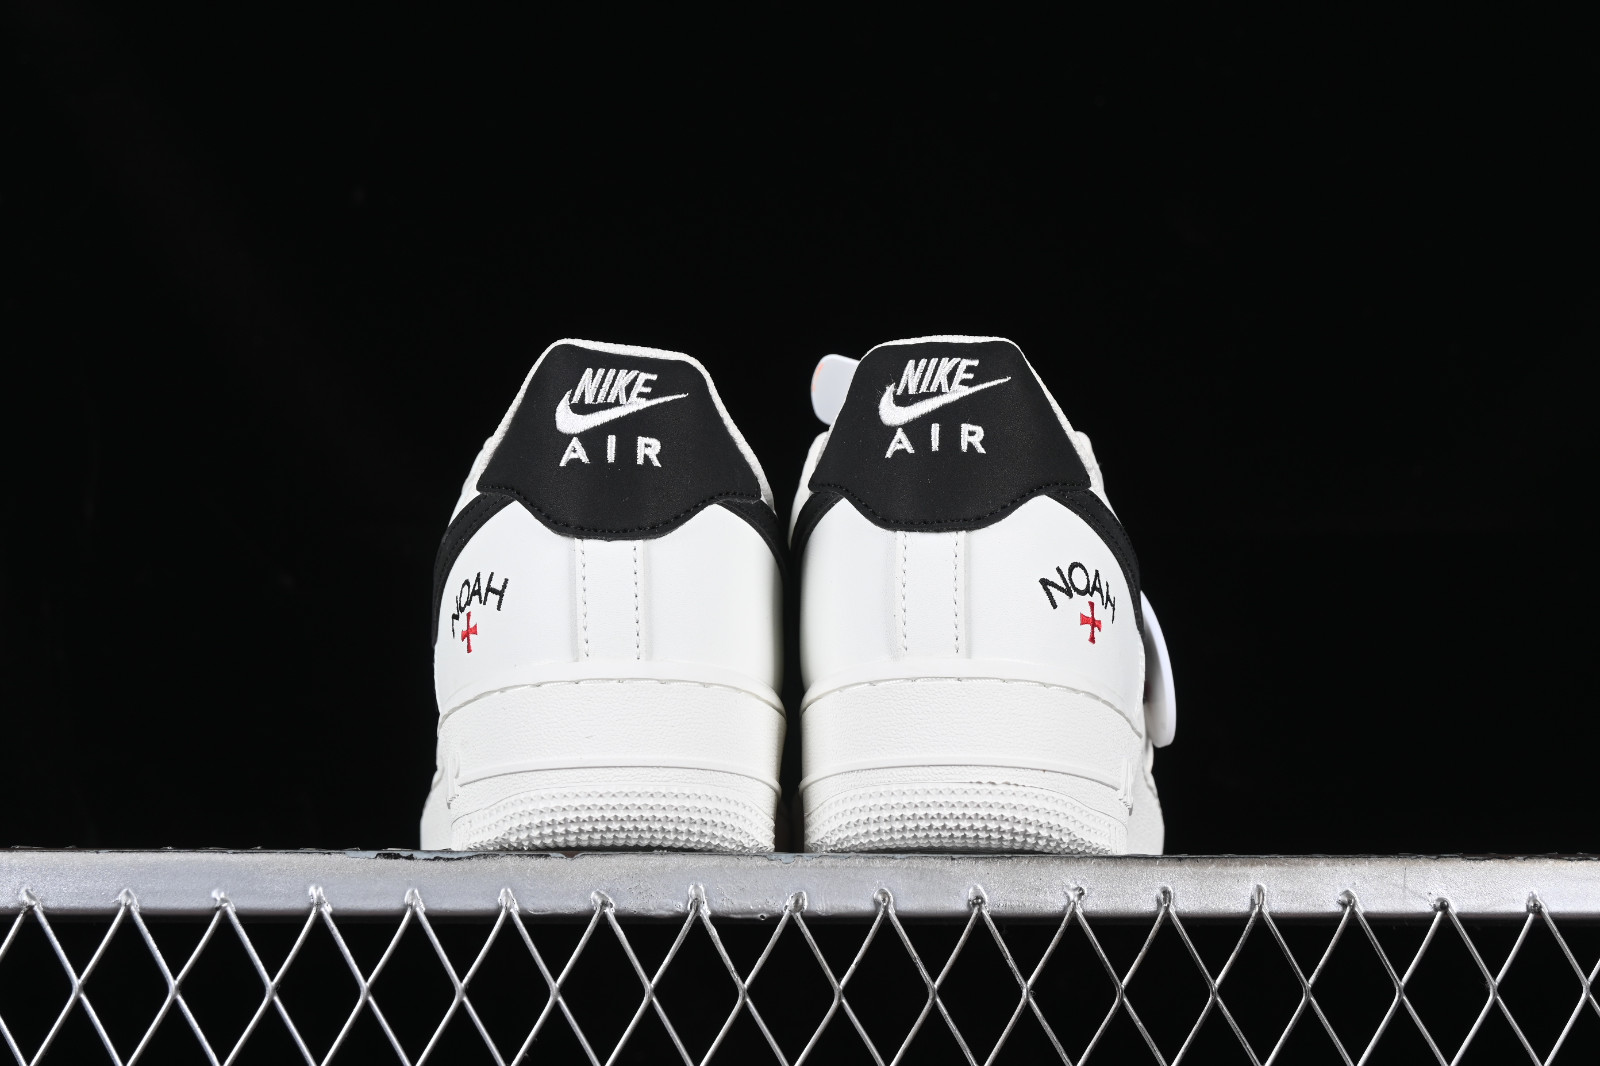 Air force 1 high trainers Nike x Off-White Grey size 42.5 EU in